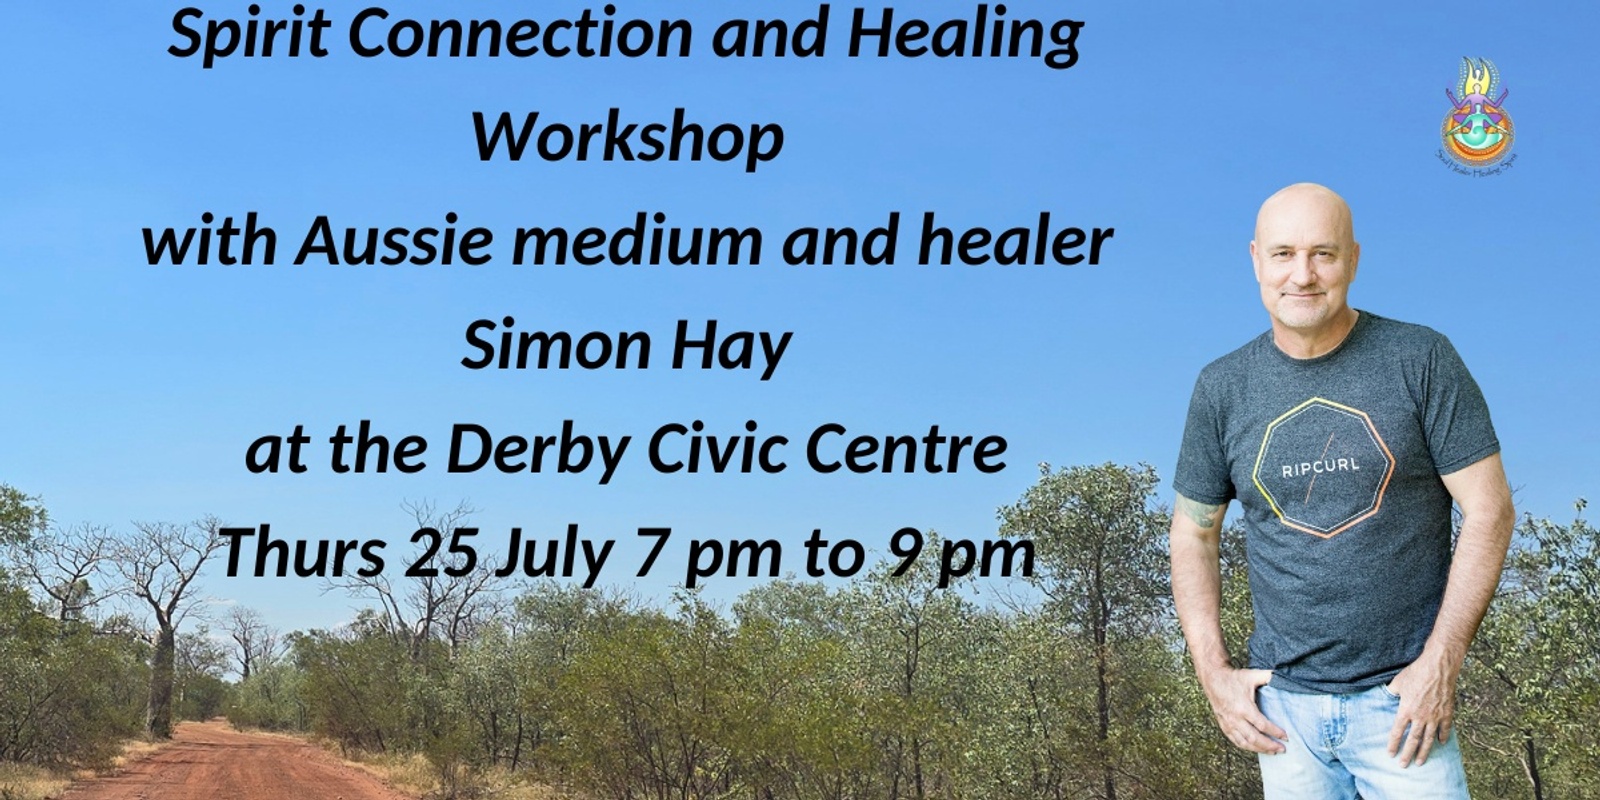 Banner image for Spirit connection and healing workshop with Aussie medium and healer, Simon Hay